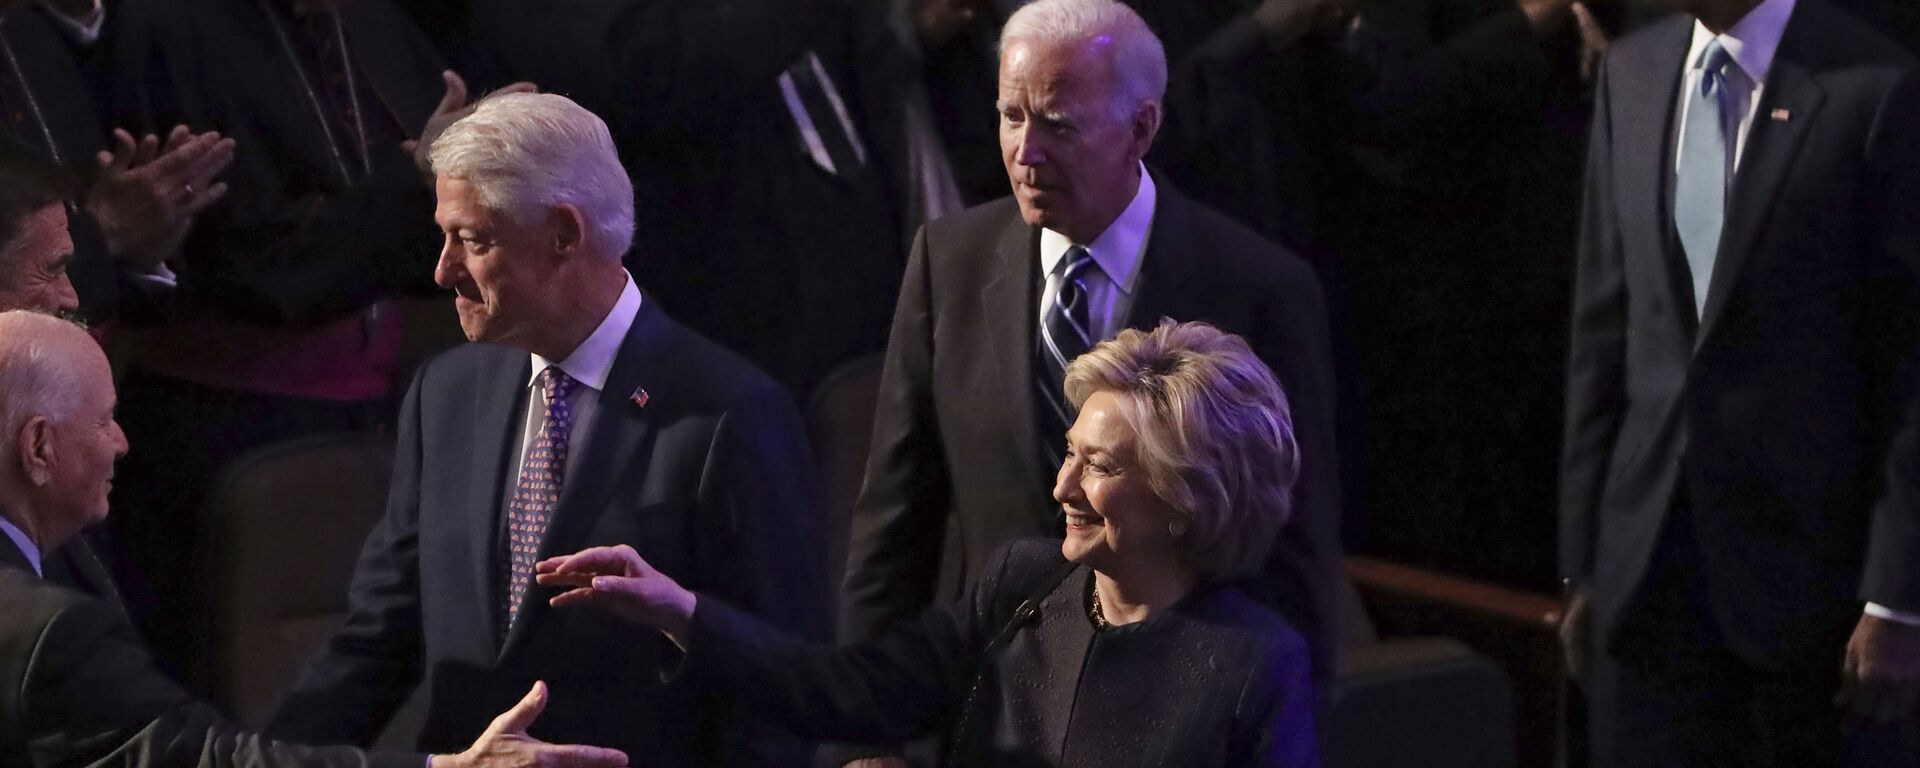 Former President Bill Clinton, former first lady and Secretary of State Hillary Clinton, current President Joe Biden and former President Barack Obama greet members of the Maryland Congressional delegation as they arrive at the funeral service for Rep. Elijah Cummings (D-MD) at New Psalmist Baptist Church on October 25, 2019 in Baltimore, Maryland. - Sputnik International, 1920, 16.01.2023